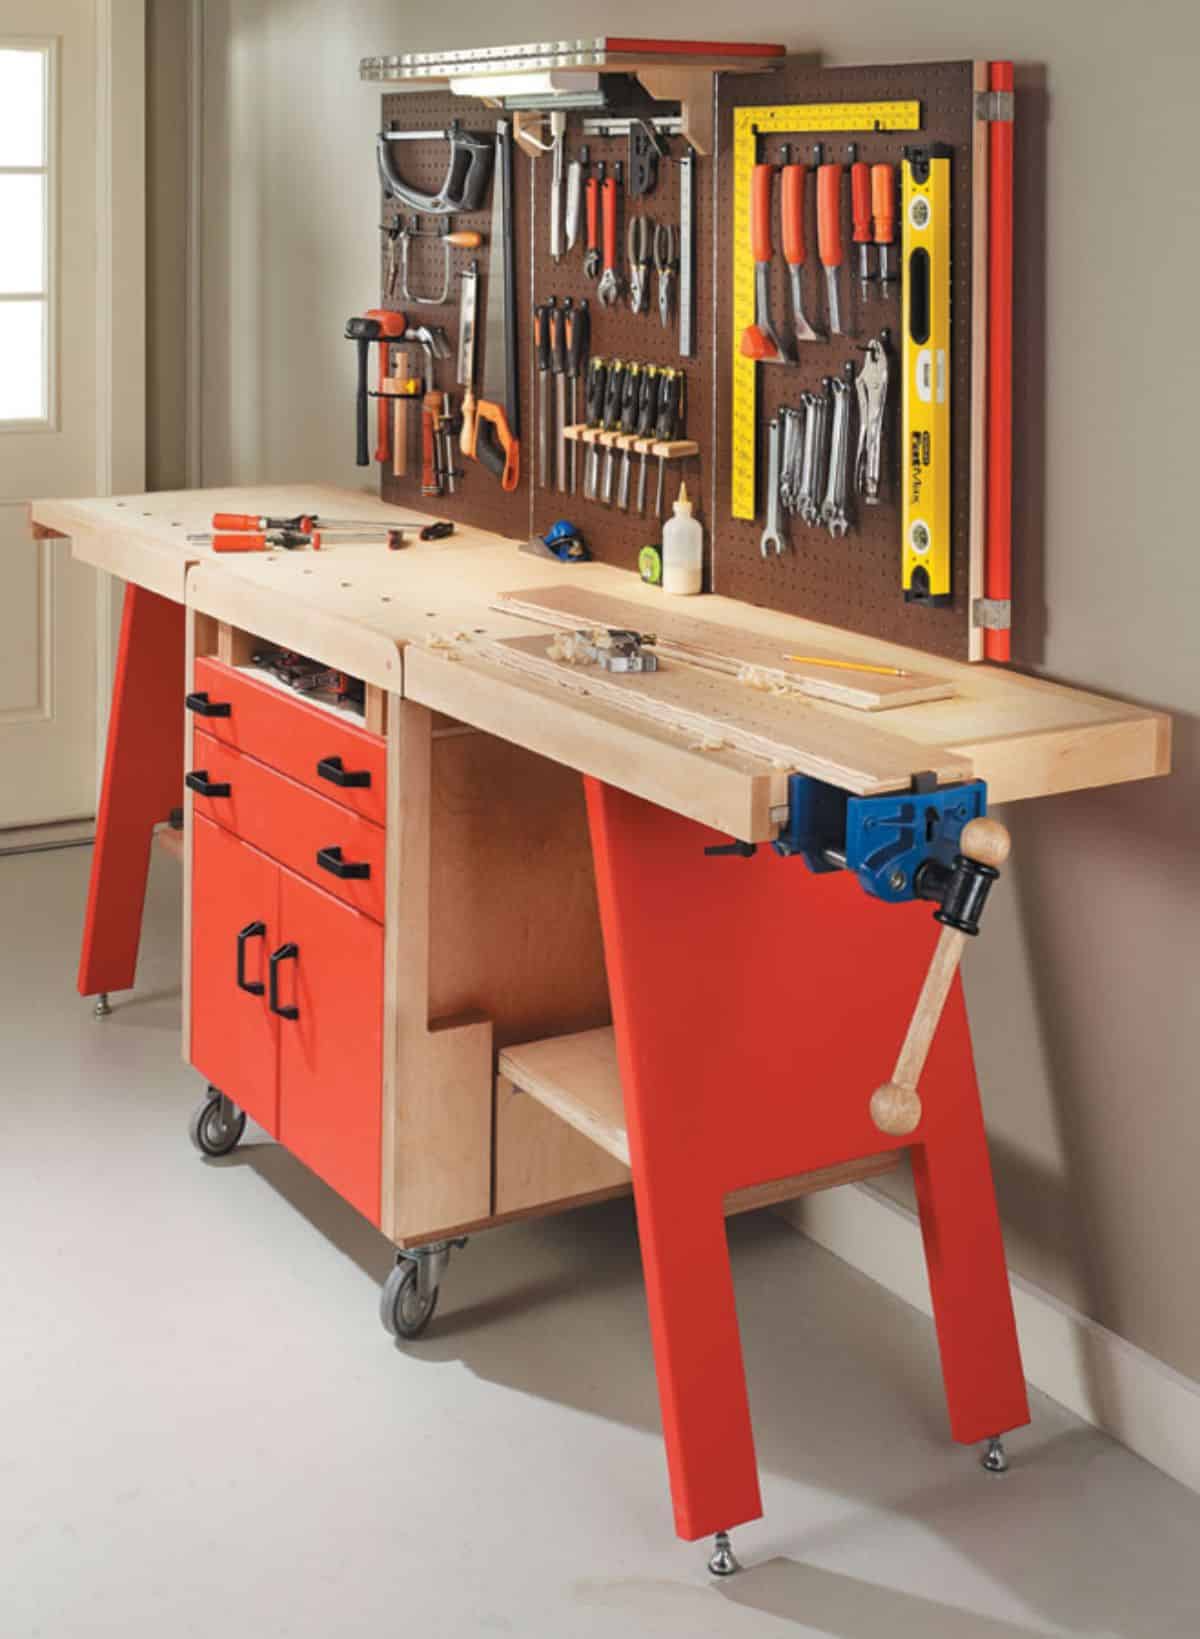 Shop-in-a-Box Work Surface with Tool Storage